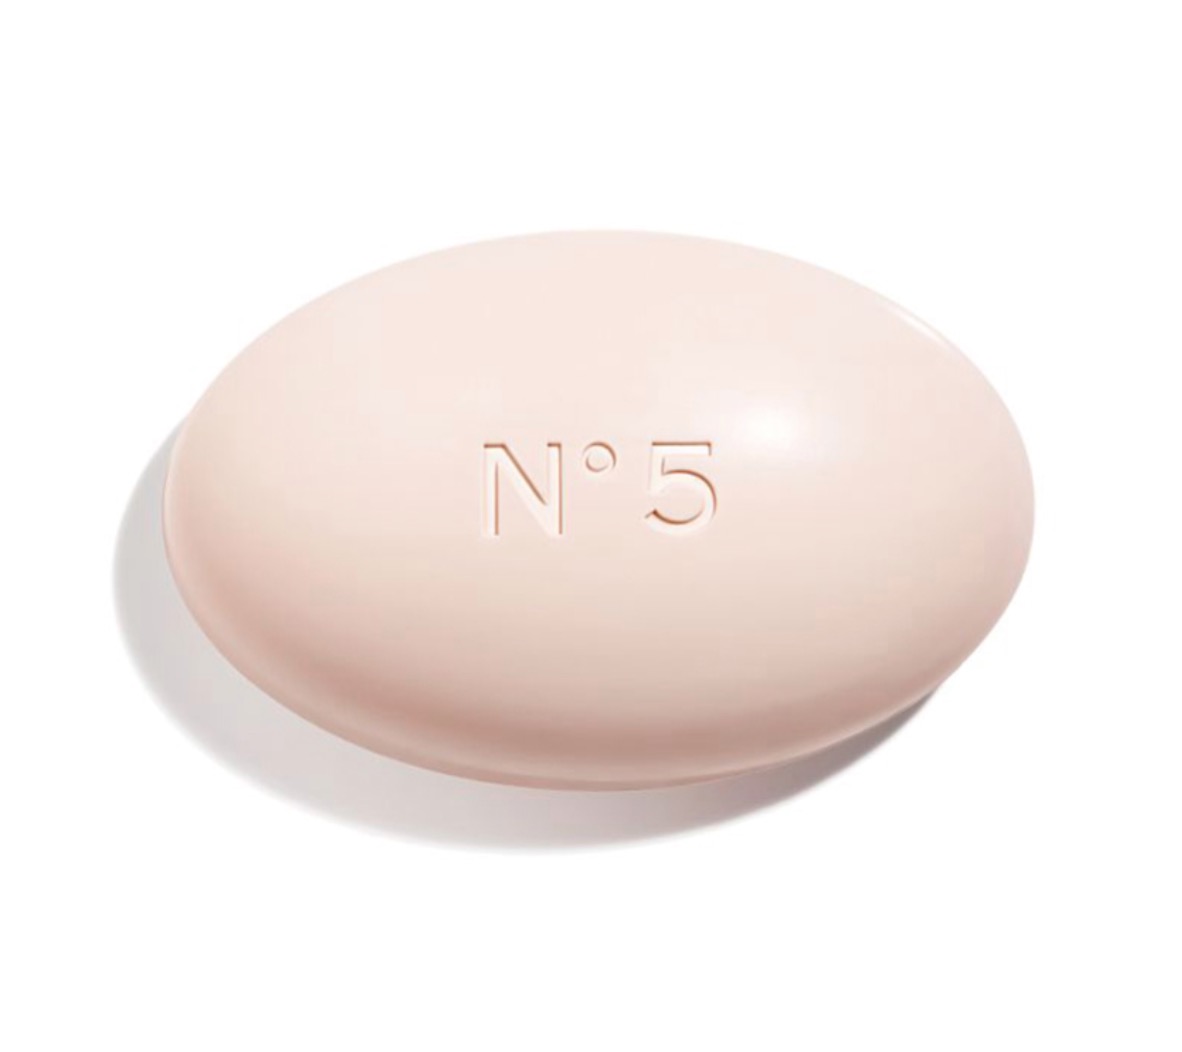 Calling all Chanel No 5 fans! Not sure if you saw this, but Holts is offering the No 5 Bath Soap. I actually like the scent better than the EDP. It's beautifully done and Chanel only offers this product every several years. A great treat for the winter months.